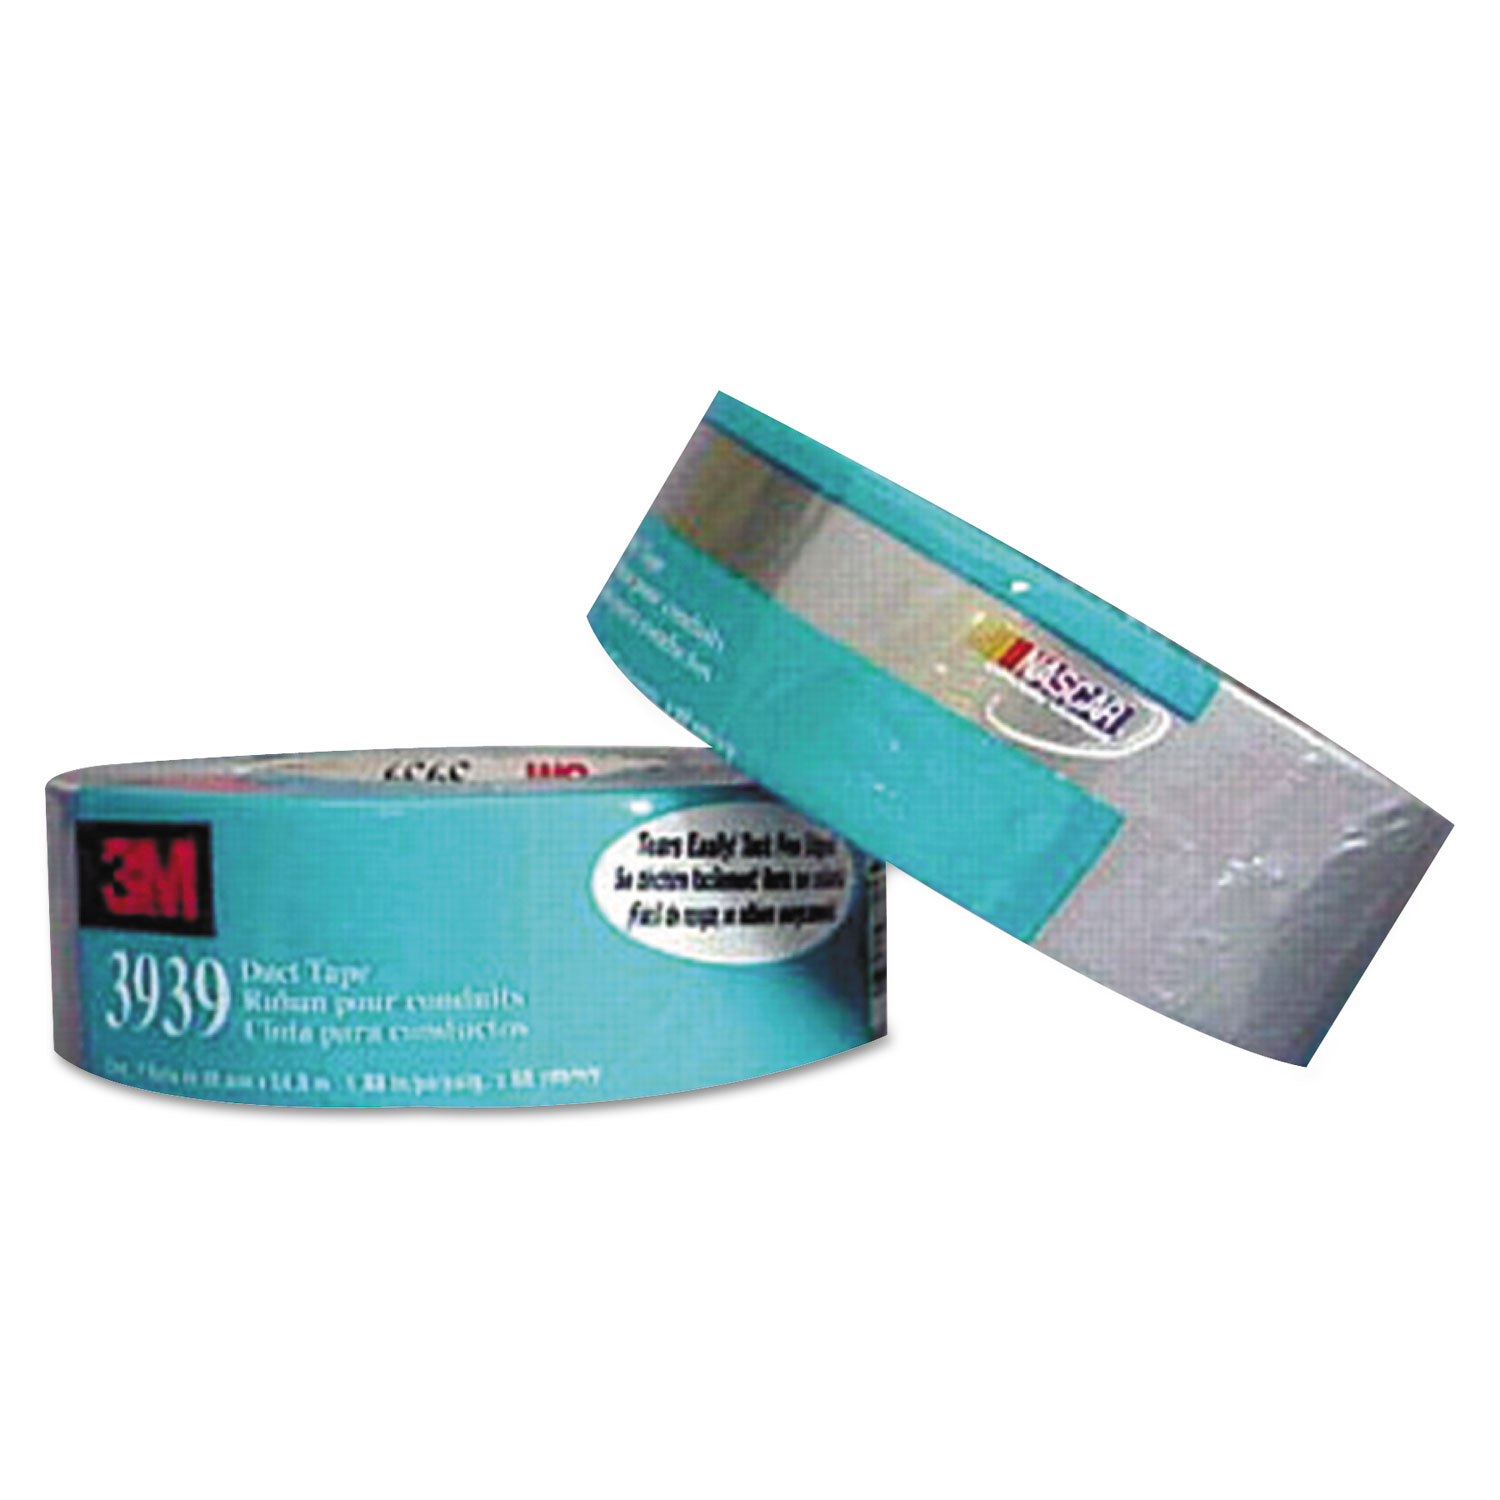 3939 Silver Duct Tape, 2in x 60yd